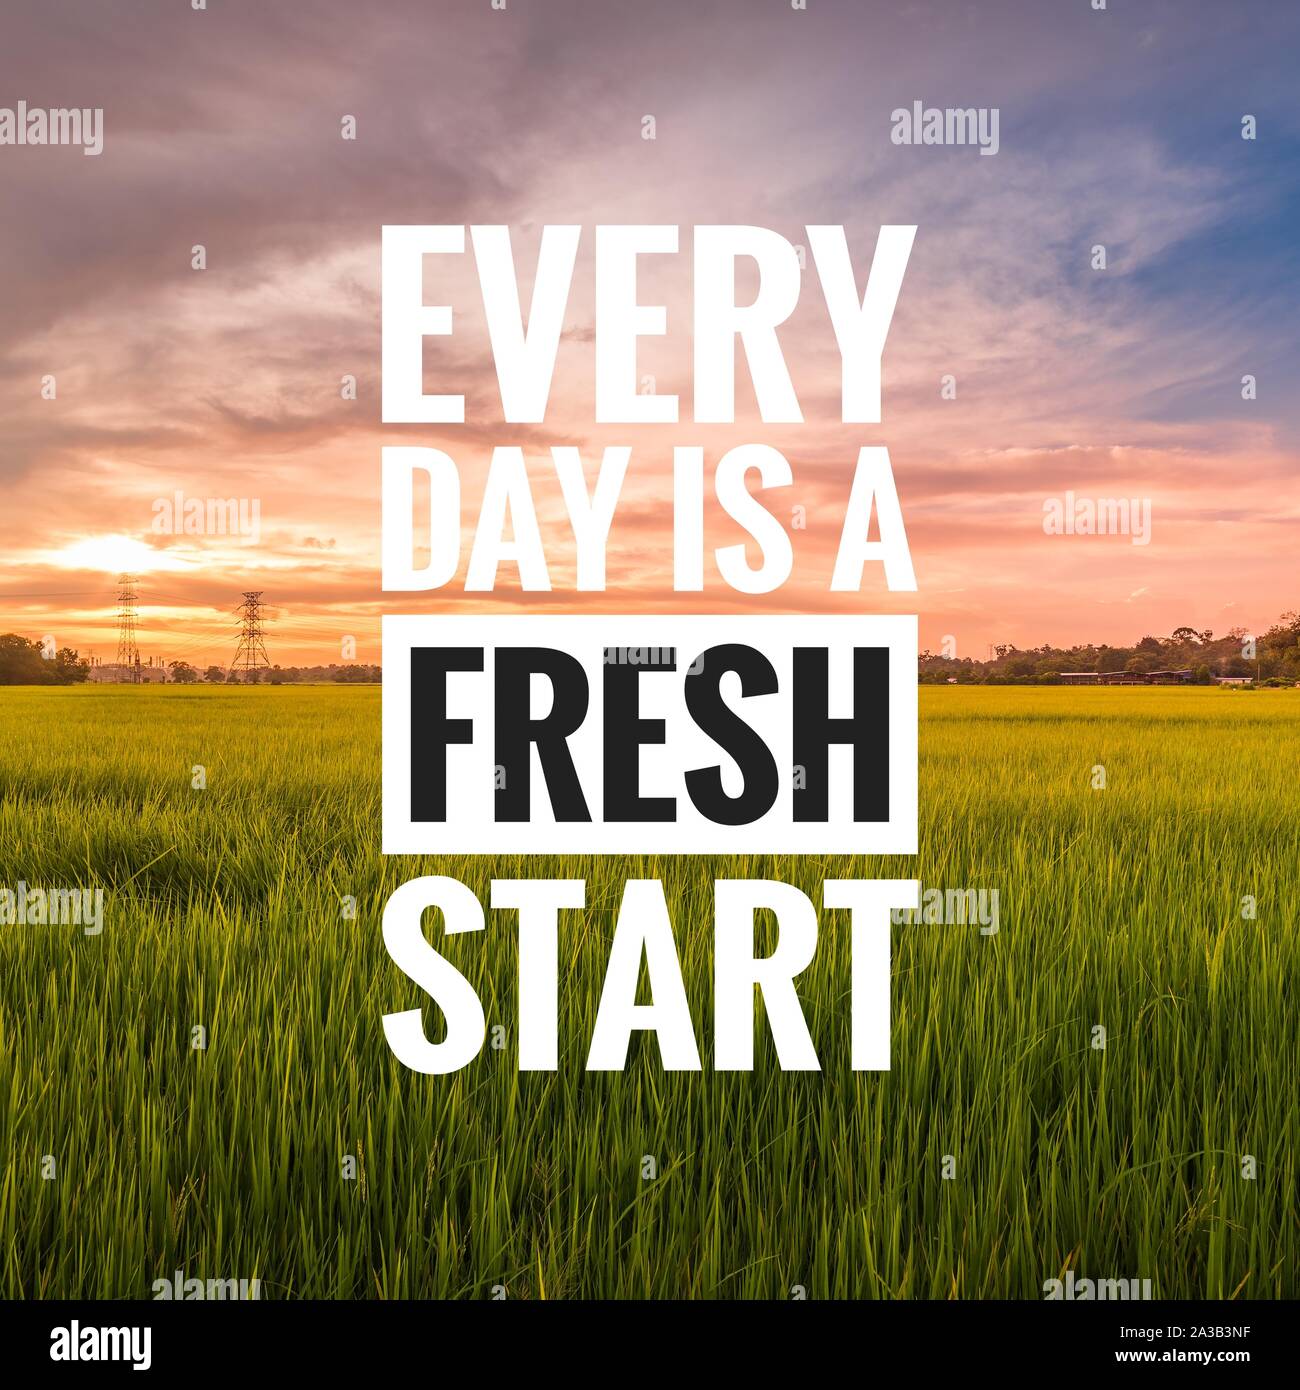 Motivational and inspirational quote - Every day is a fresh start. Stock Photo